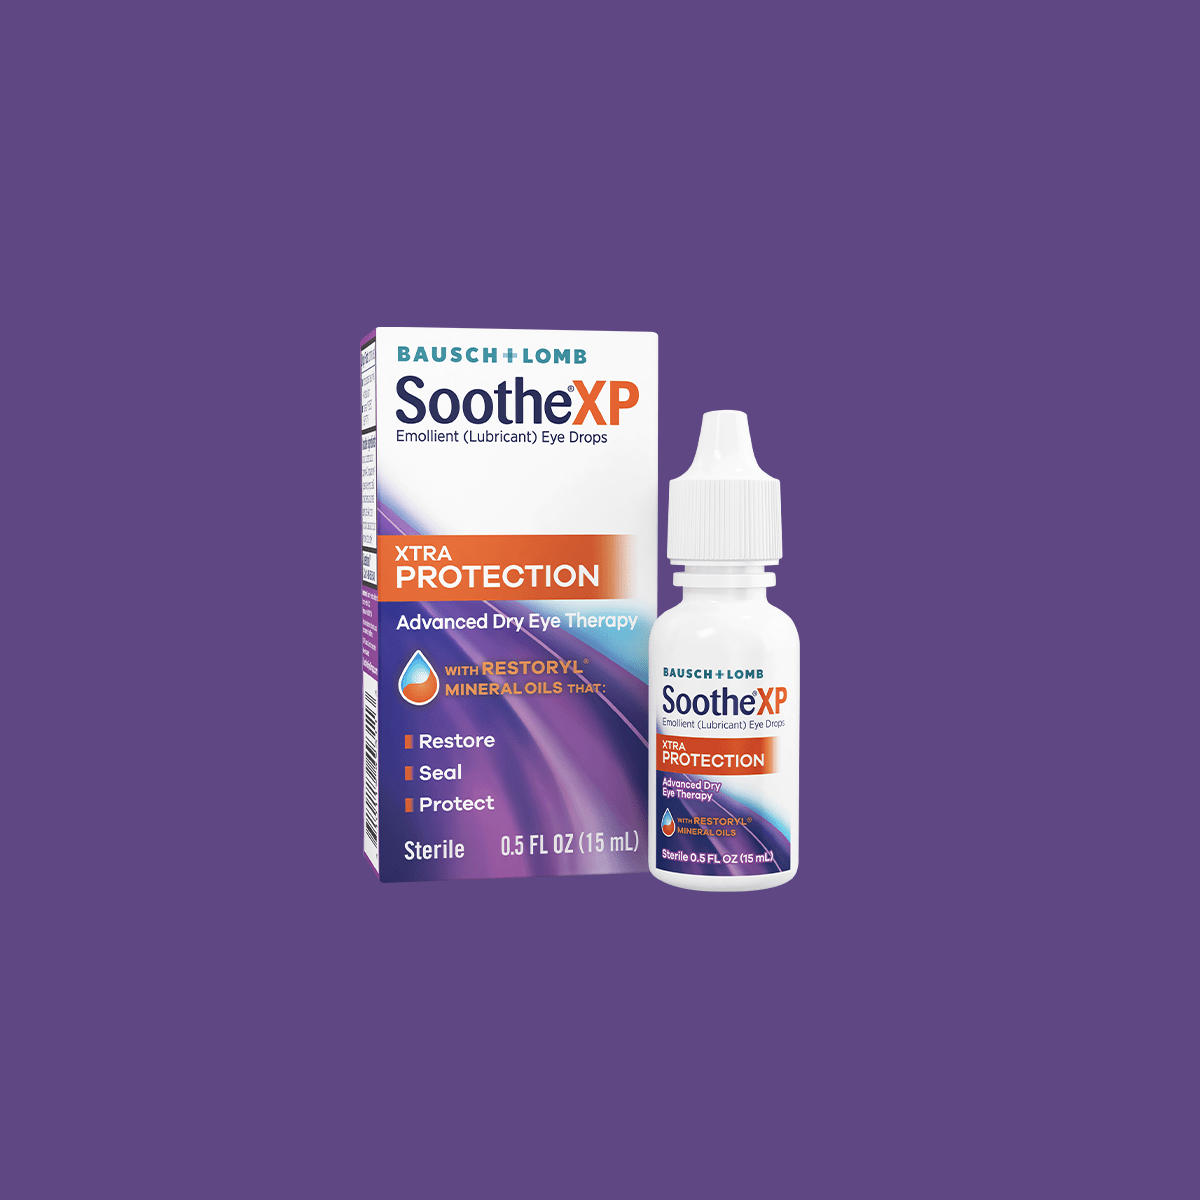 Bausch & Lomb Soothe XP Lubricant Eye Drops, Xtra Protection Formula, (15 ml Bottle) - Dryeye Rescue